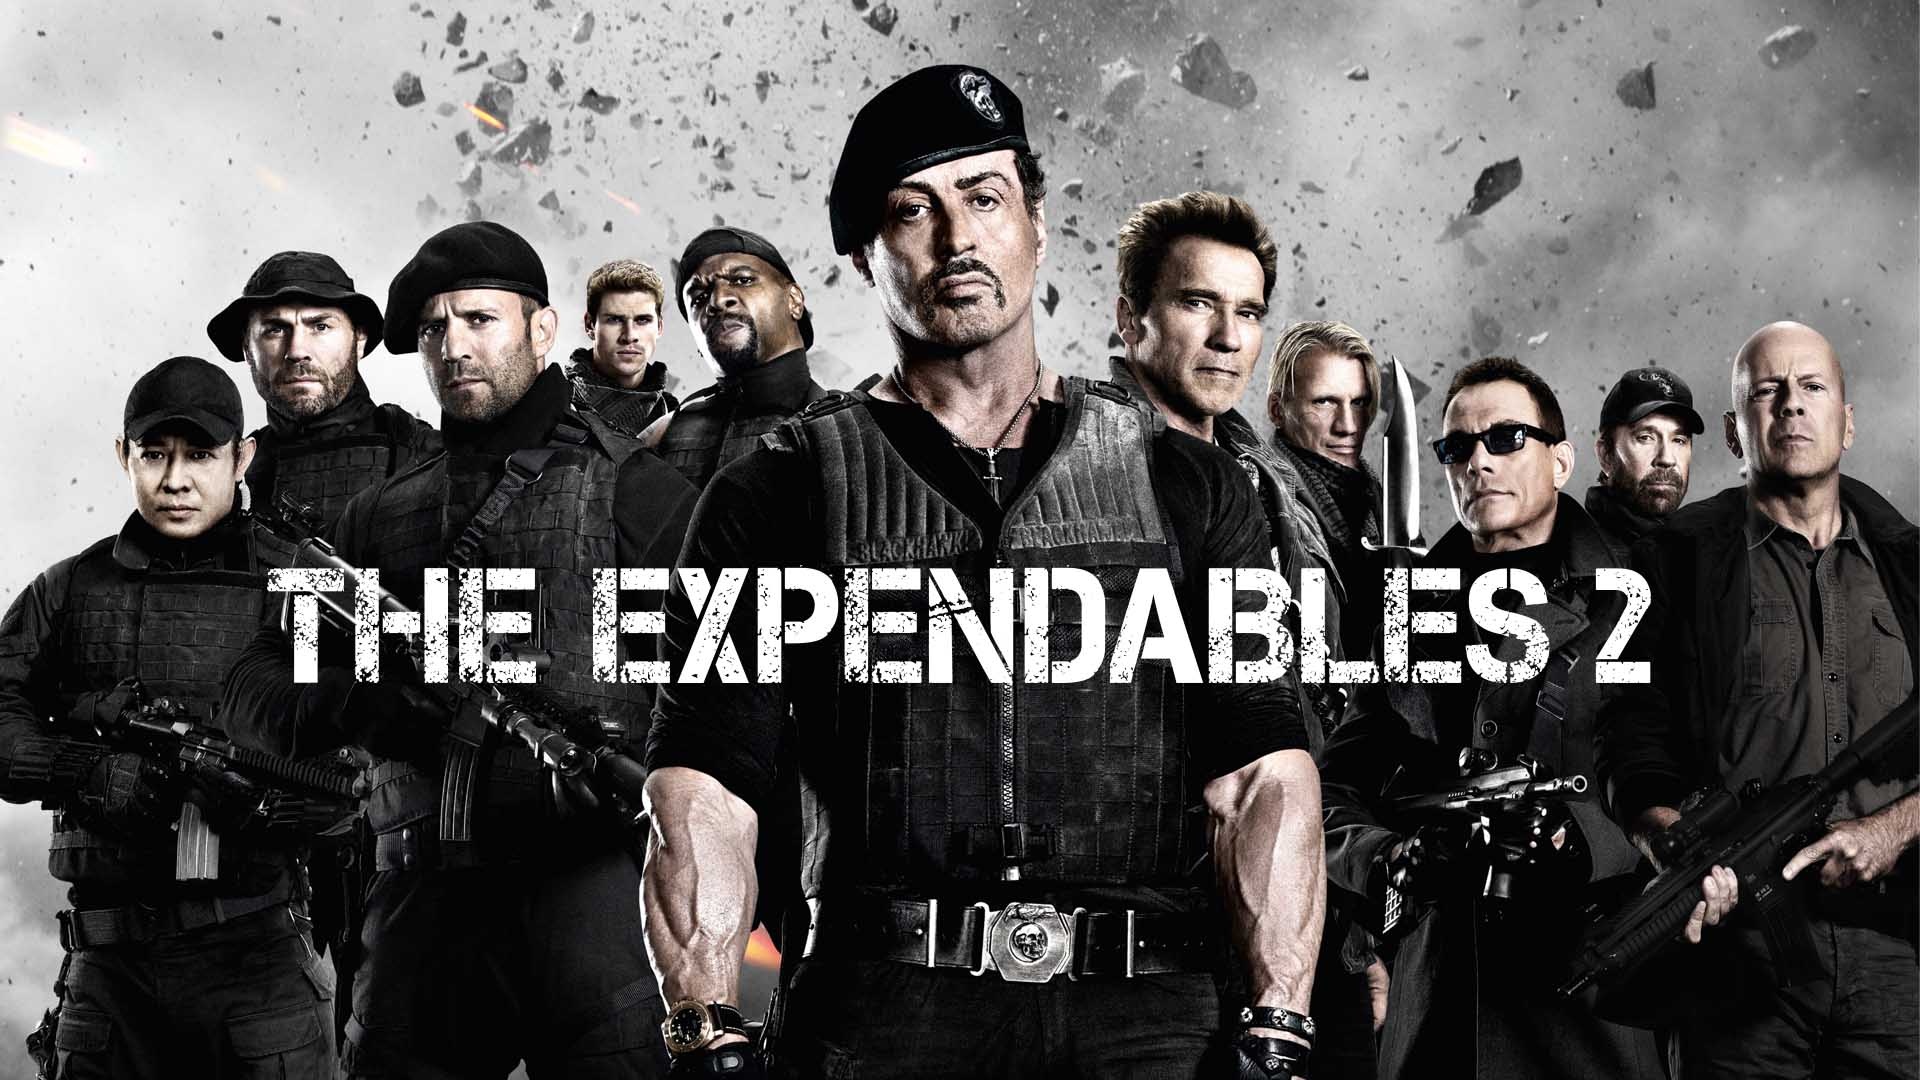 The Expendables 2 wallpapers, Top backgrounds, Explosive action, Iconic characters, 1920x1080 Full HD Desktop